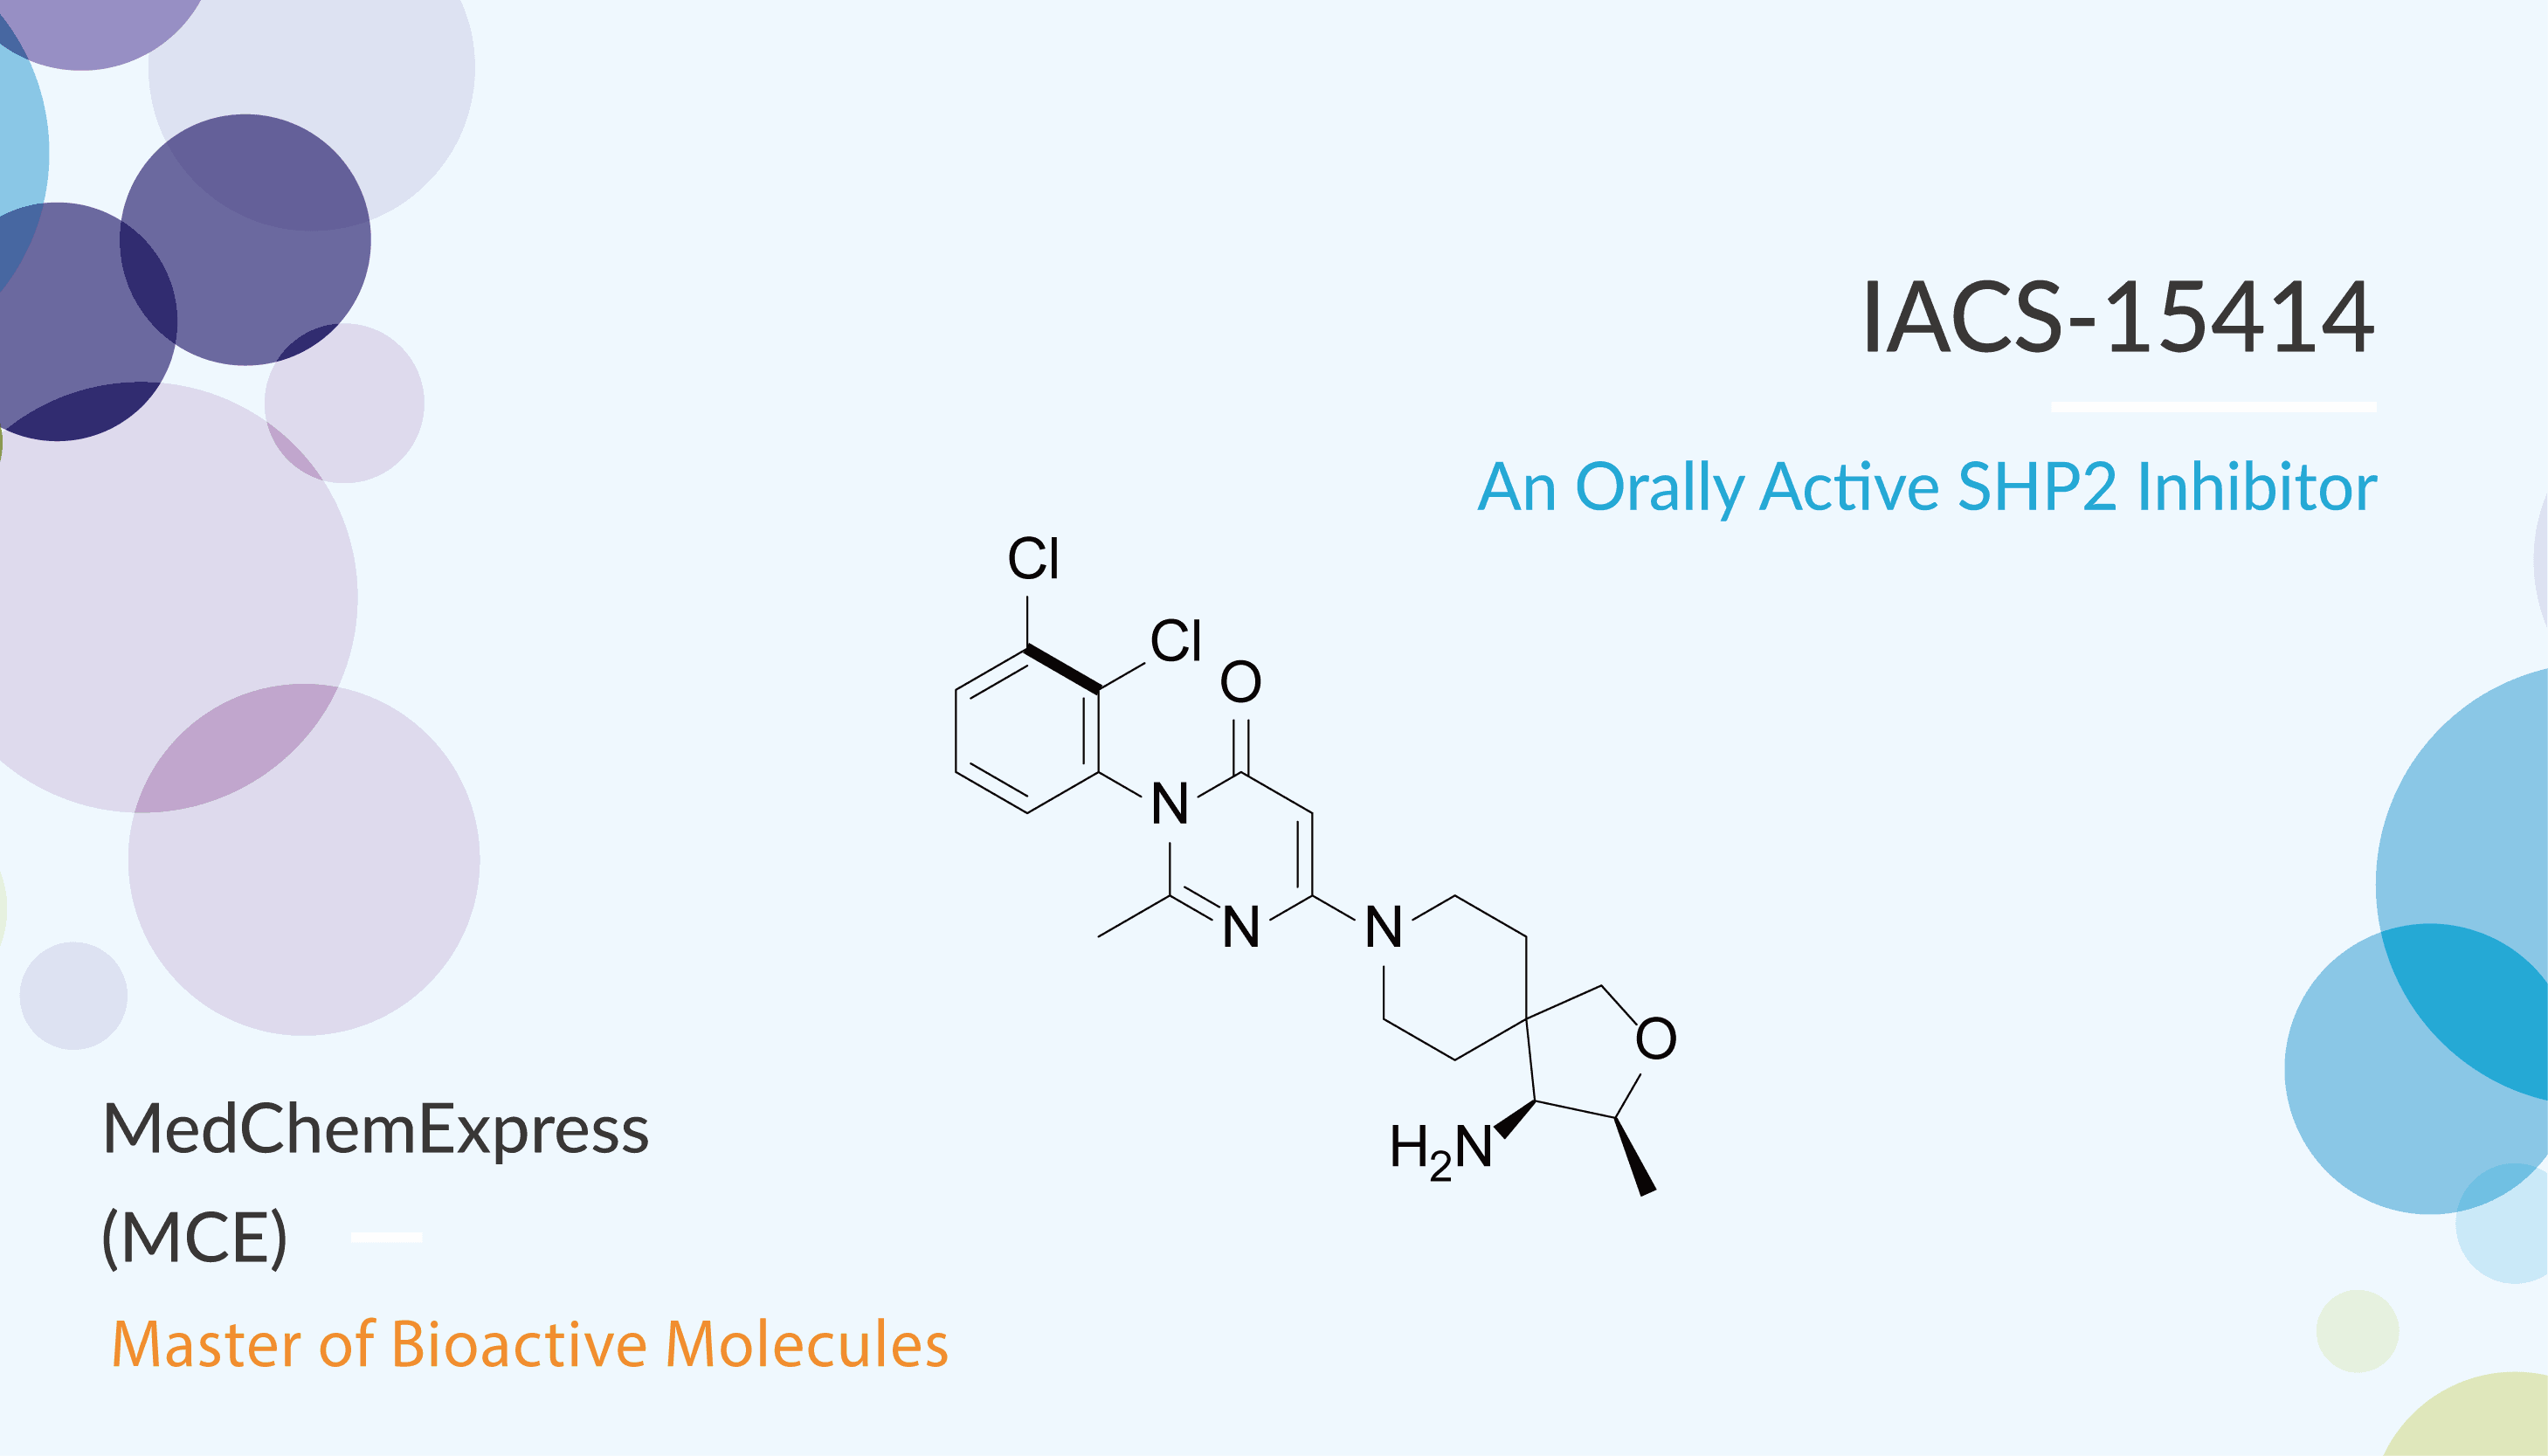 IACS 15414 is an Orally Active SHP2 Inhibitor 2022 01 31 - IACS-15414 is an Orally Active SHP2 Inhibitor